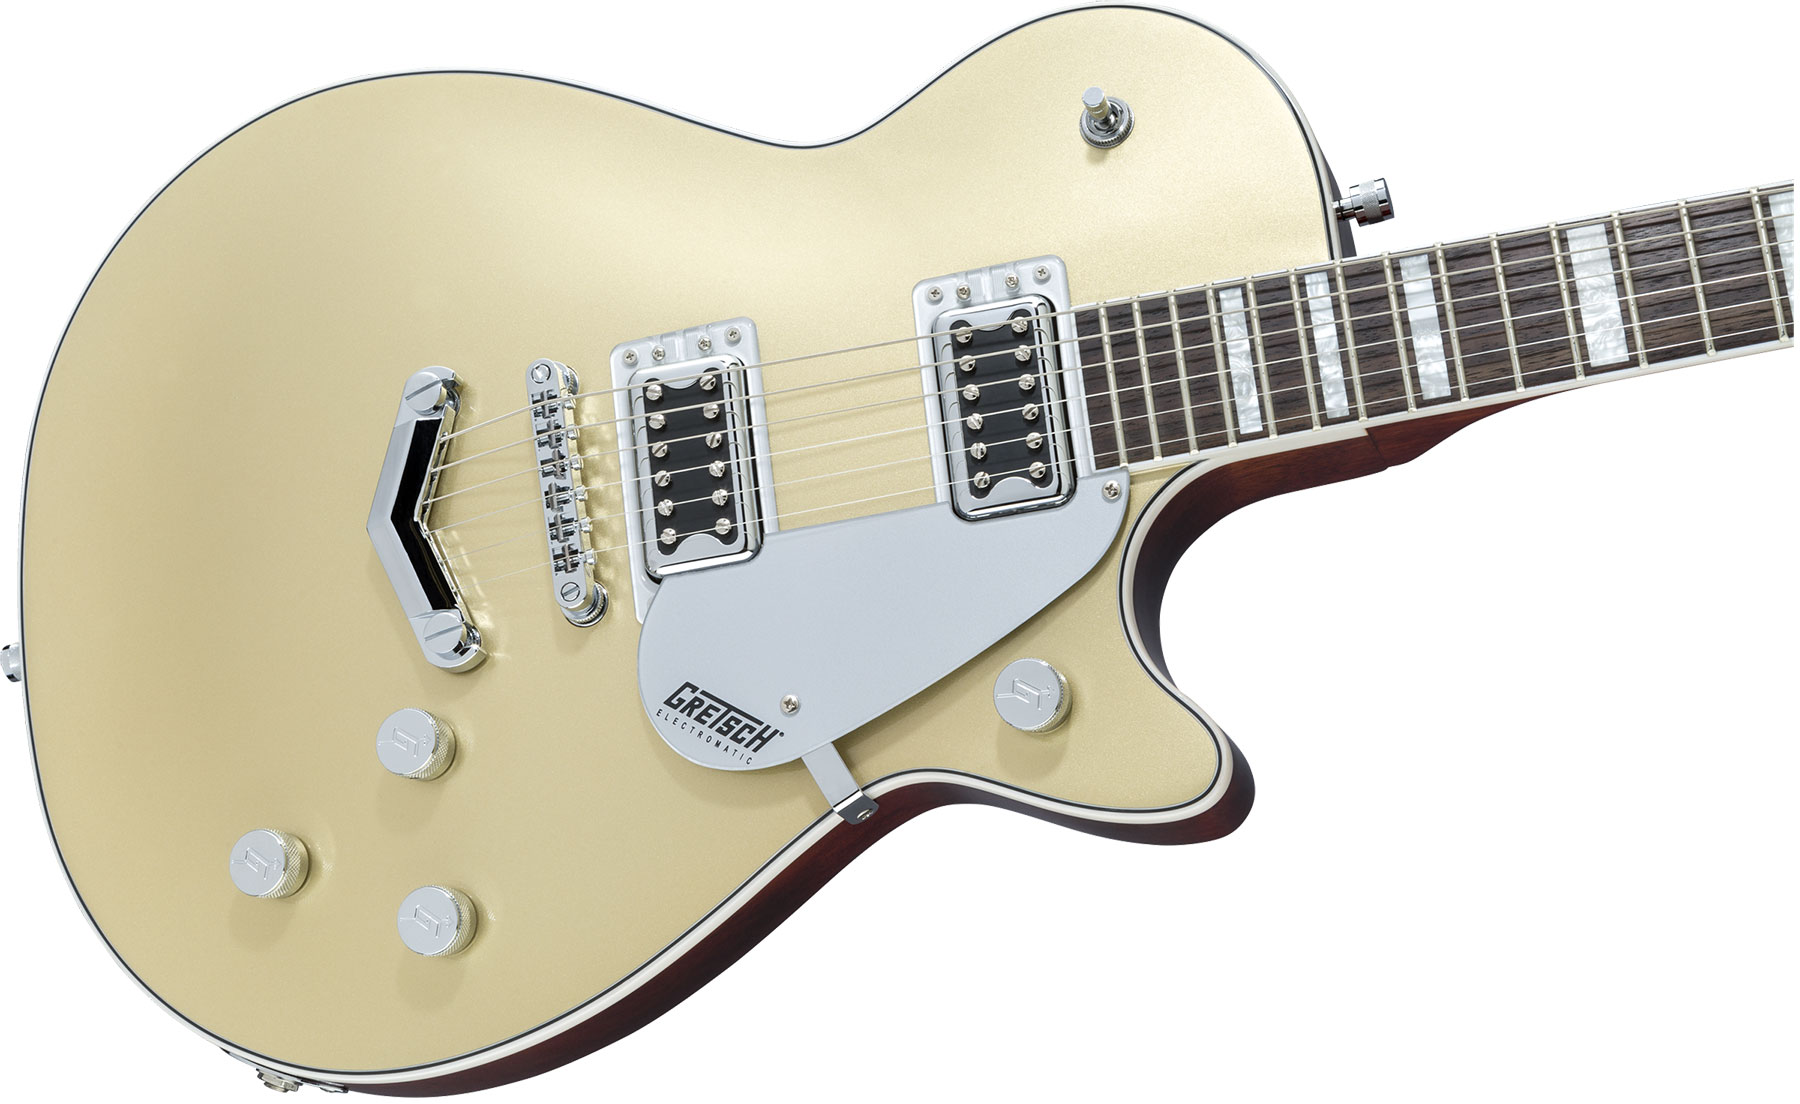 Gretsch G5220 Electromatic Jet Bt V-stoptail Hh Ht Wal - Casino Gold - Single cut electric guitar - Variation 2